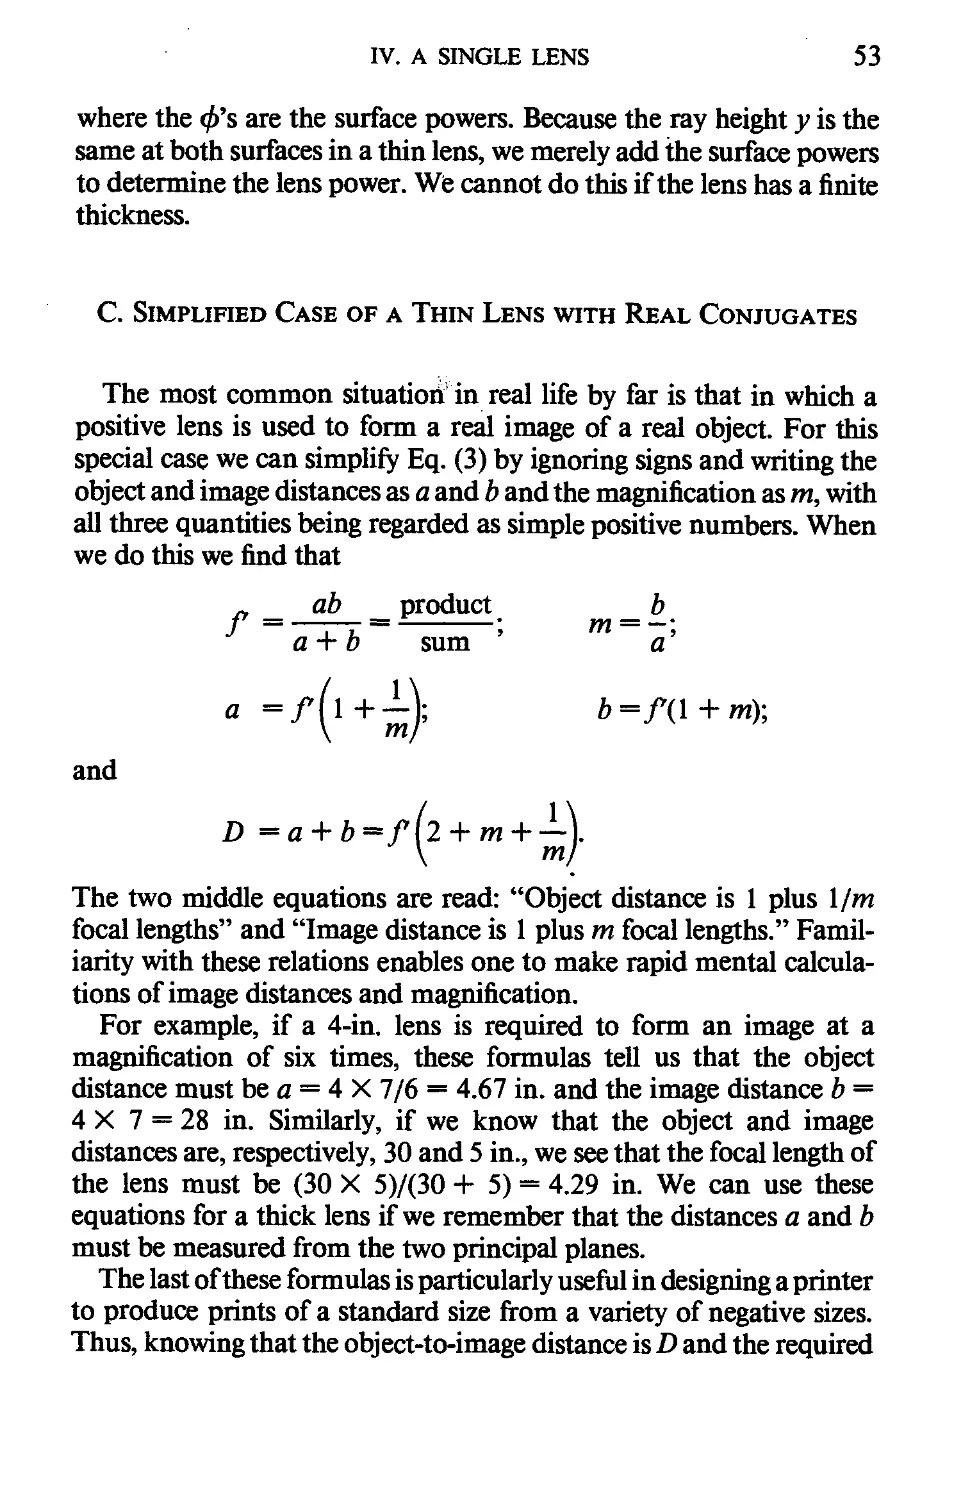 С. Simplified Case of a Thin Lens with Real Conjugates